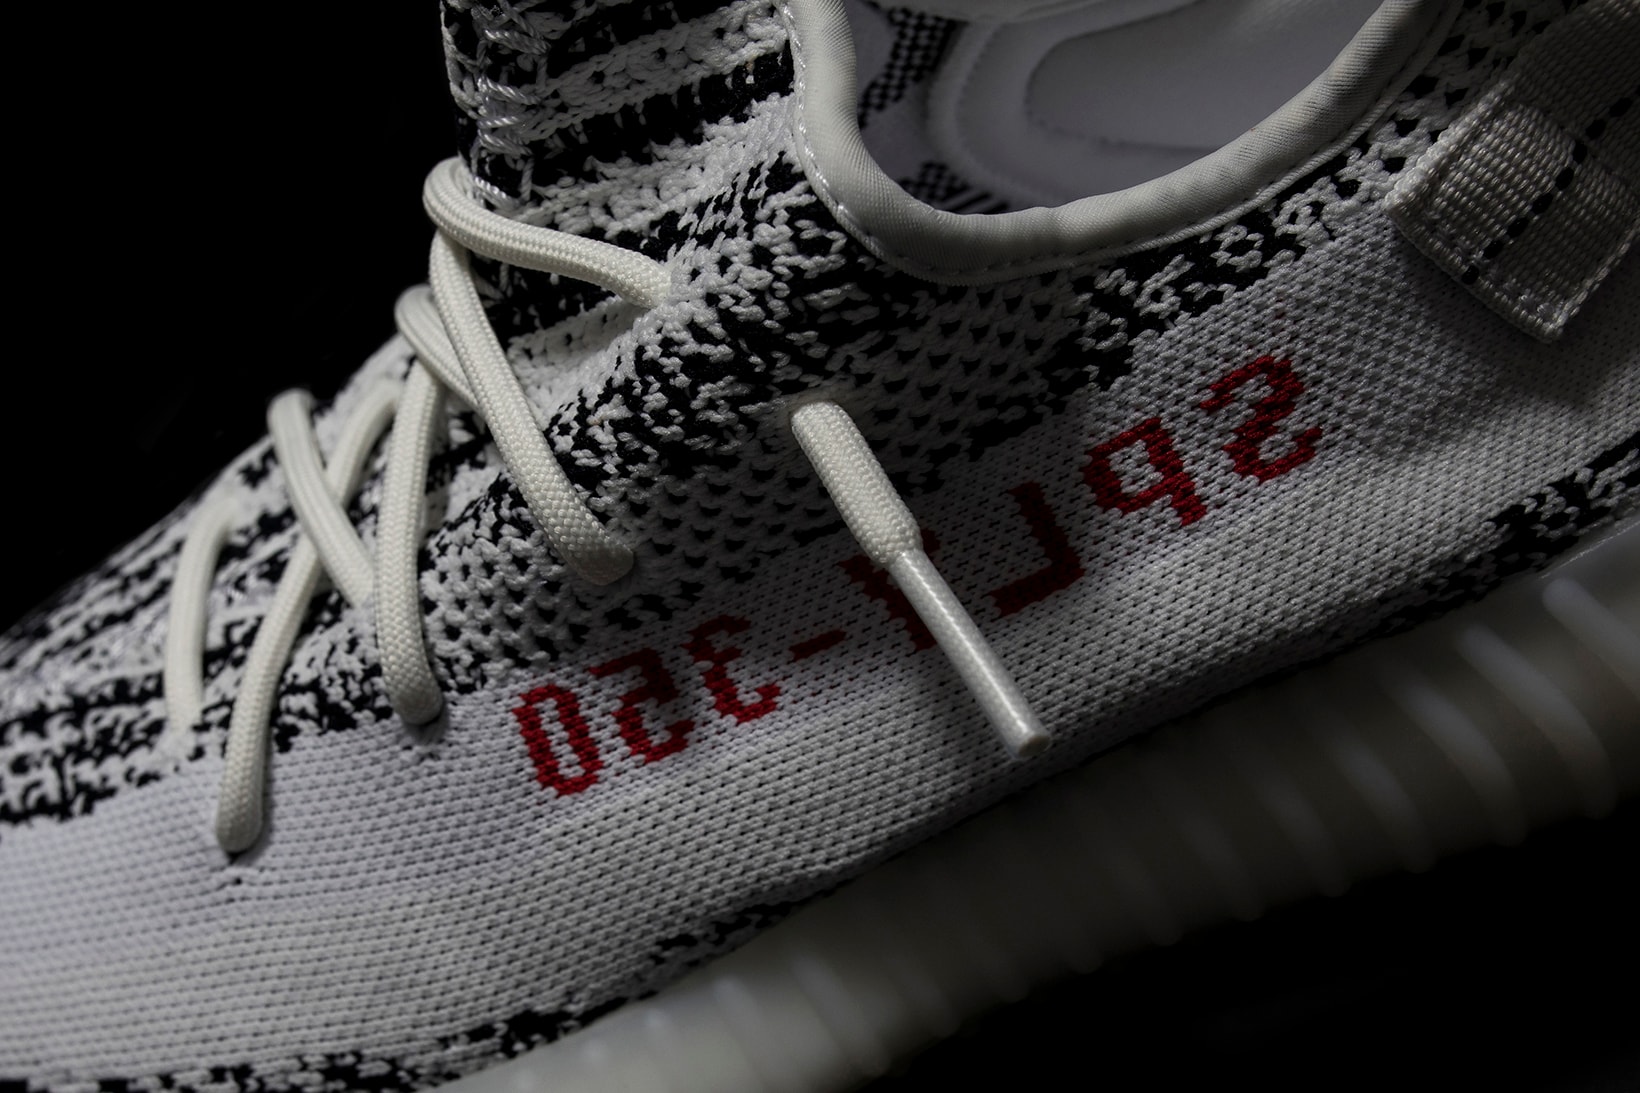 adidas Originals YEEZY BOOST 350 V2 Zebra Available at GOAT close up